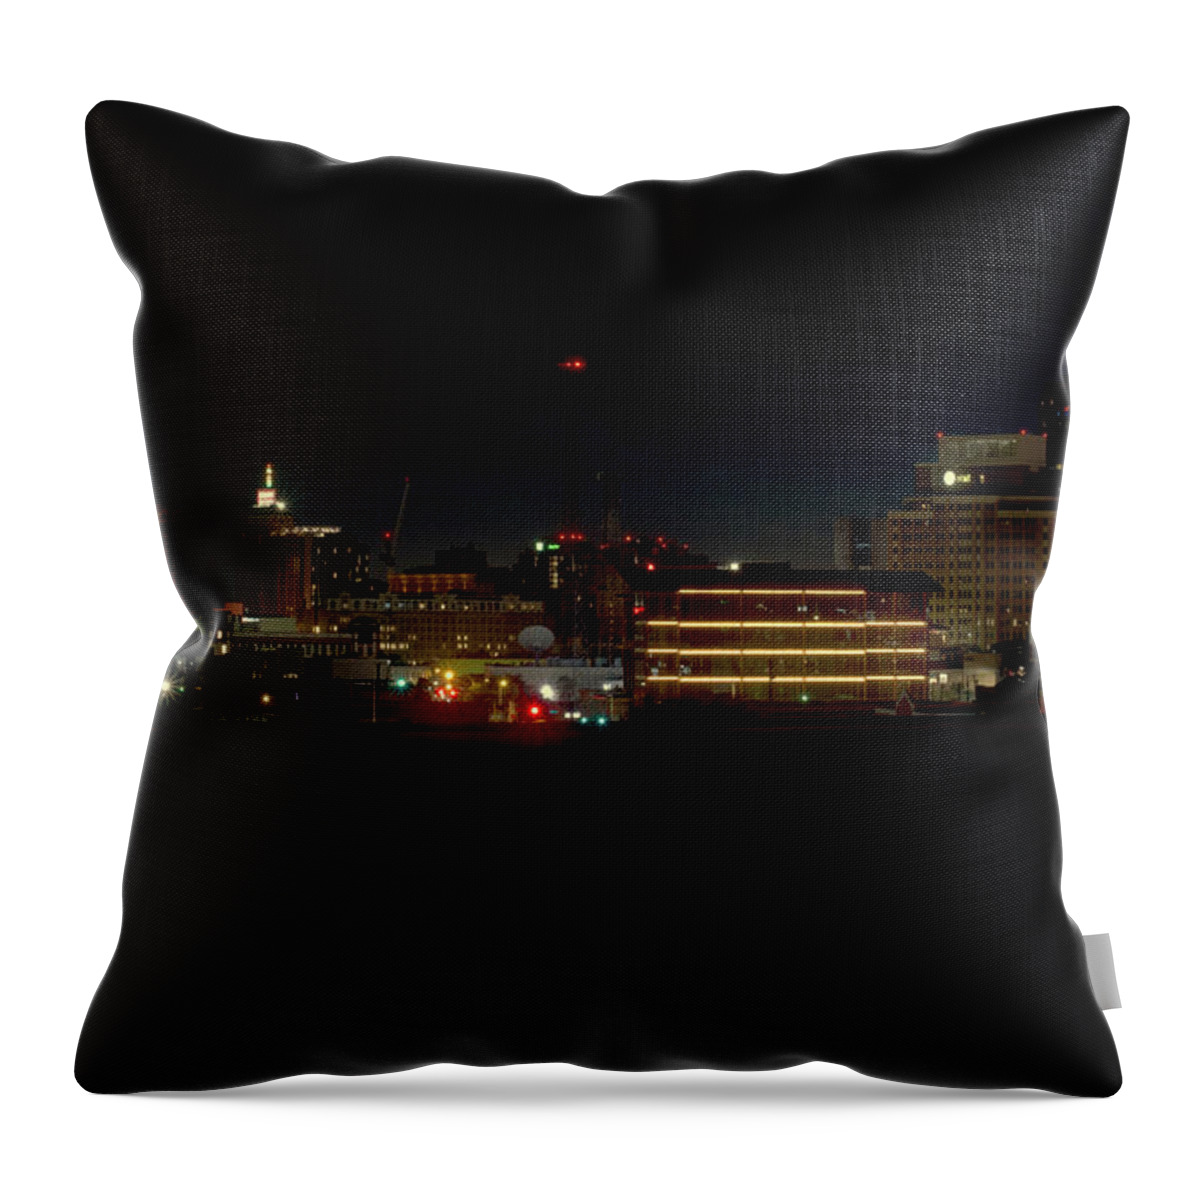 Satx Throw Pillow featuring the photograph Downtown Nightlife 2 by Eric Hafner